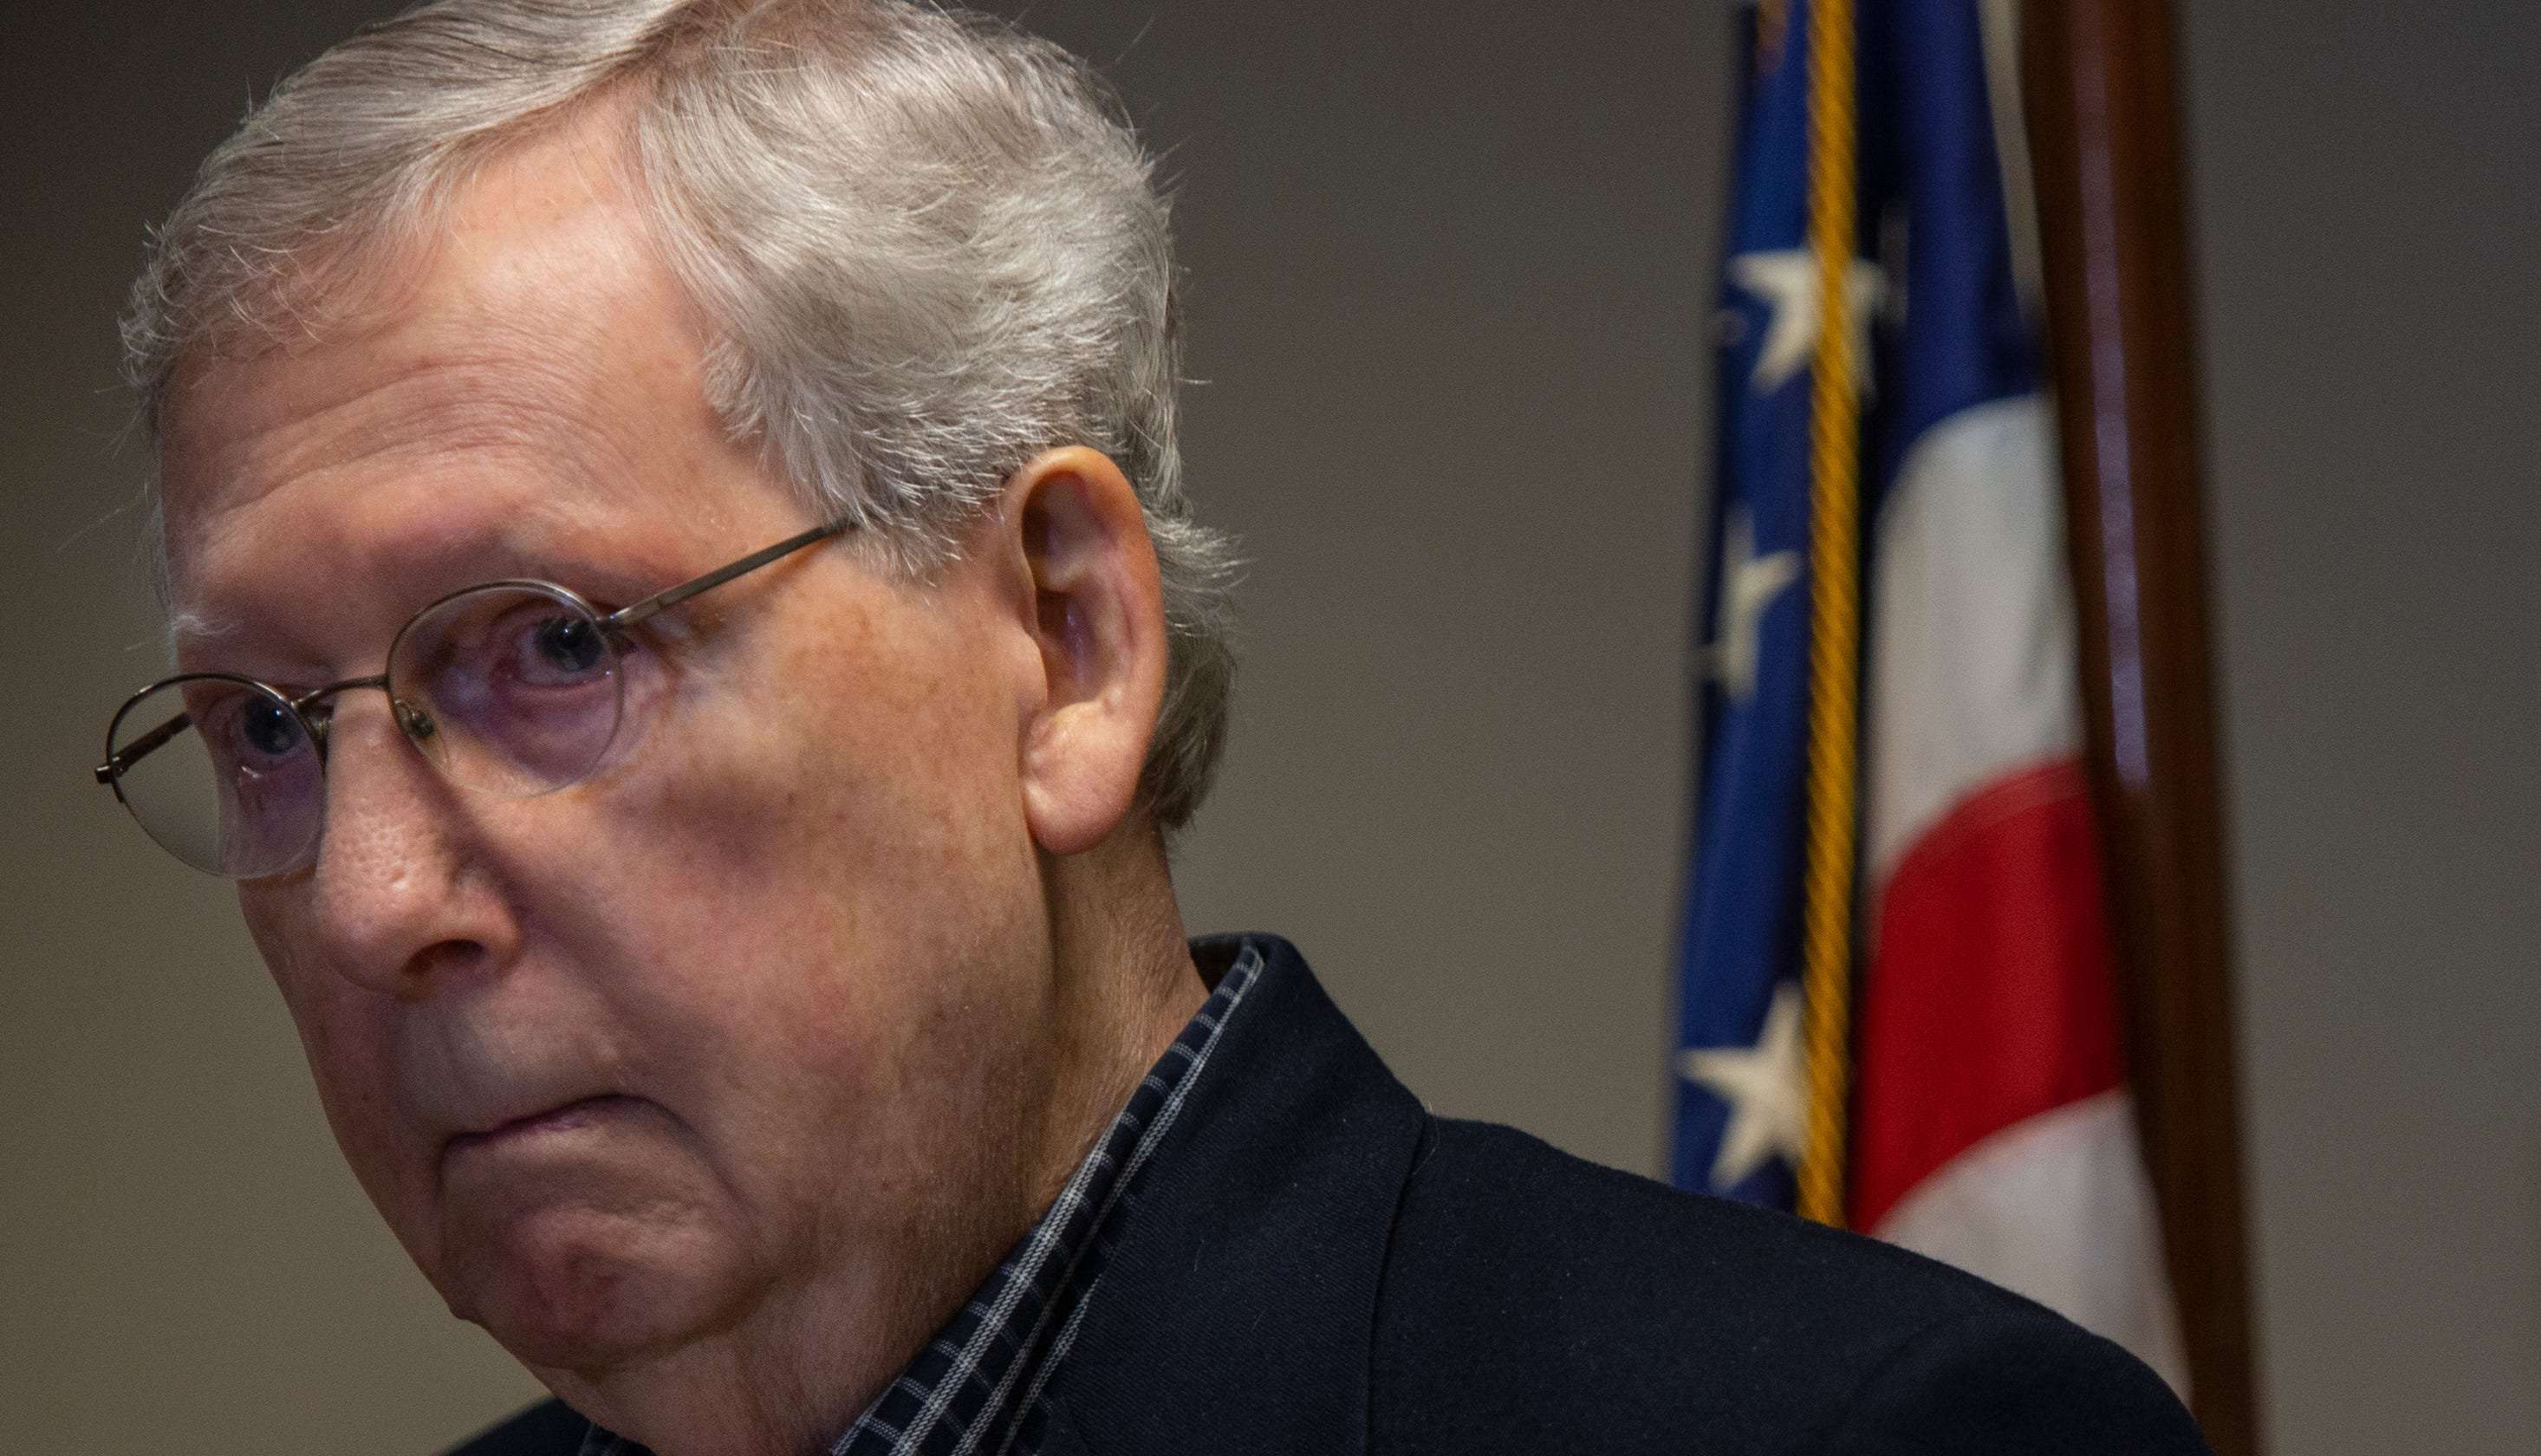 image for Moscow Mitch McConnell's Senate rant exposed sore spot